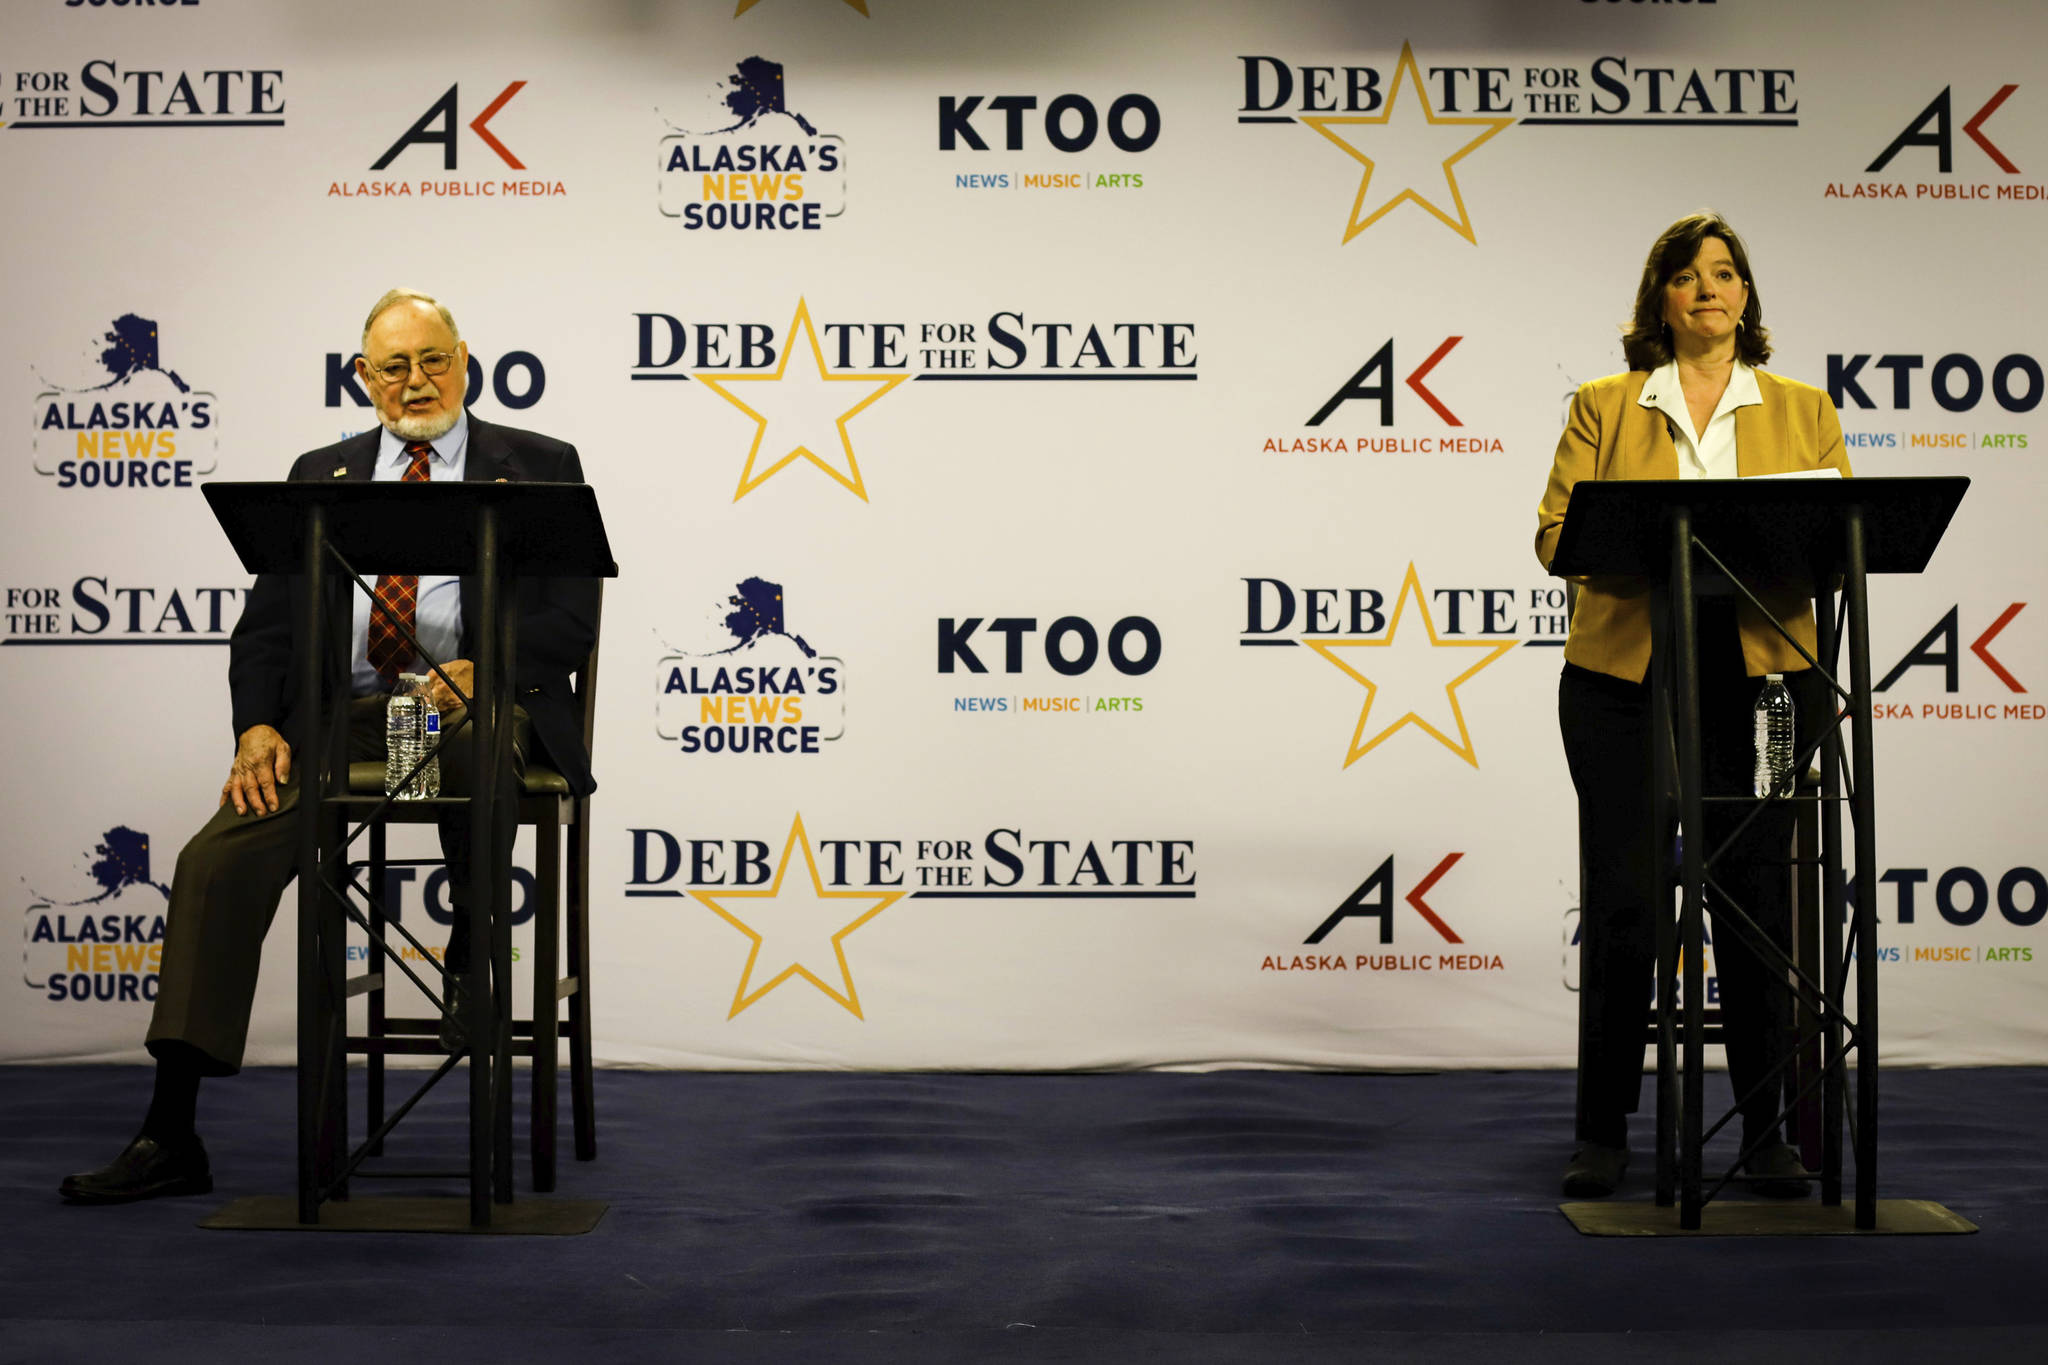 U.S. Rep. Don Young, left, and Alyse Galvin square off in a debate for the sole Alaska house seat Thursday, Oct. 22, 2020, in Anchorage, Alaska. The debate between the candidates for Alaska’s sole seat in Congress became contentious Thursday, with challenger Galvin saying she’s tired of Young misrepresenting her position on issues. (Jeff Chen / Pool Photo)